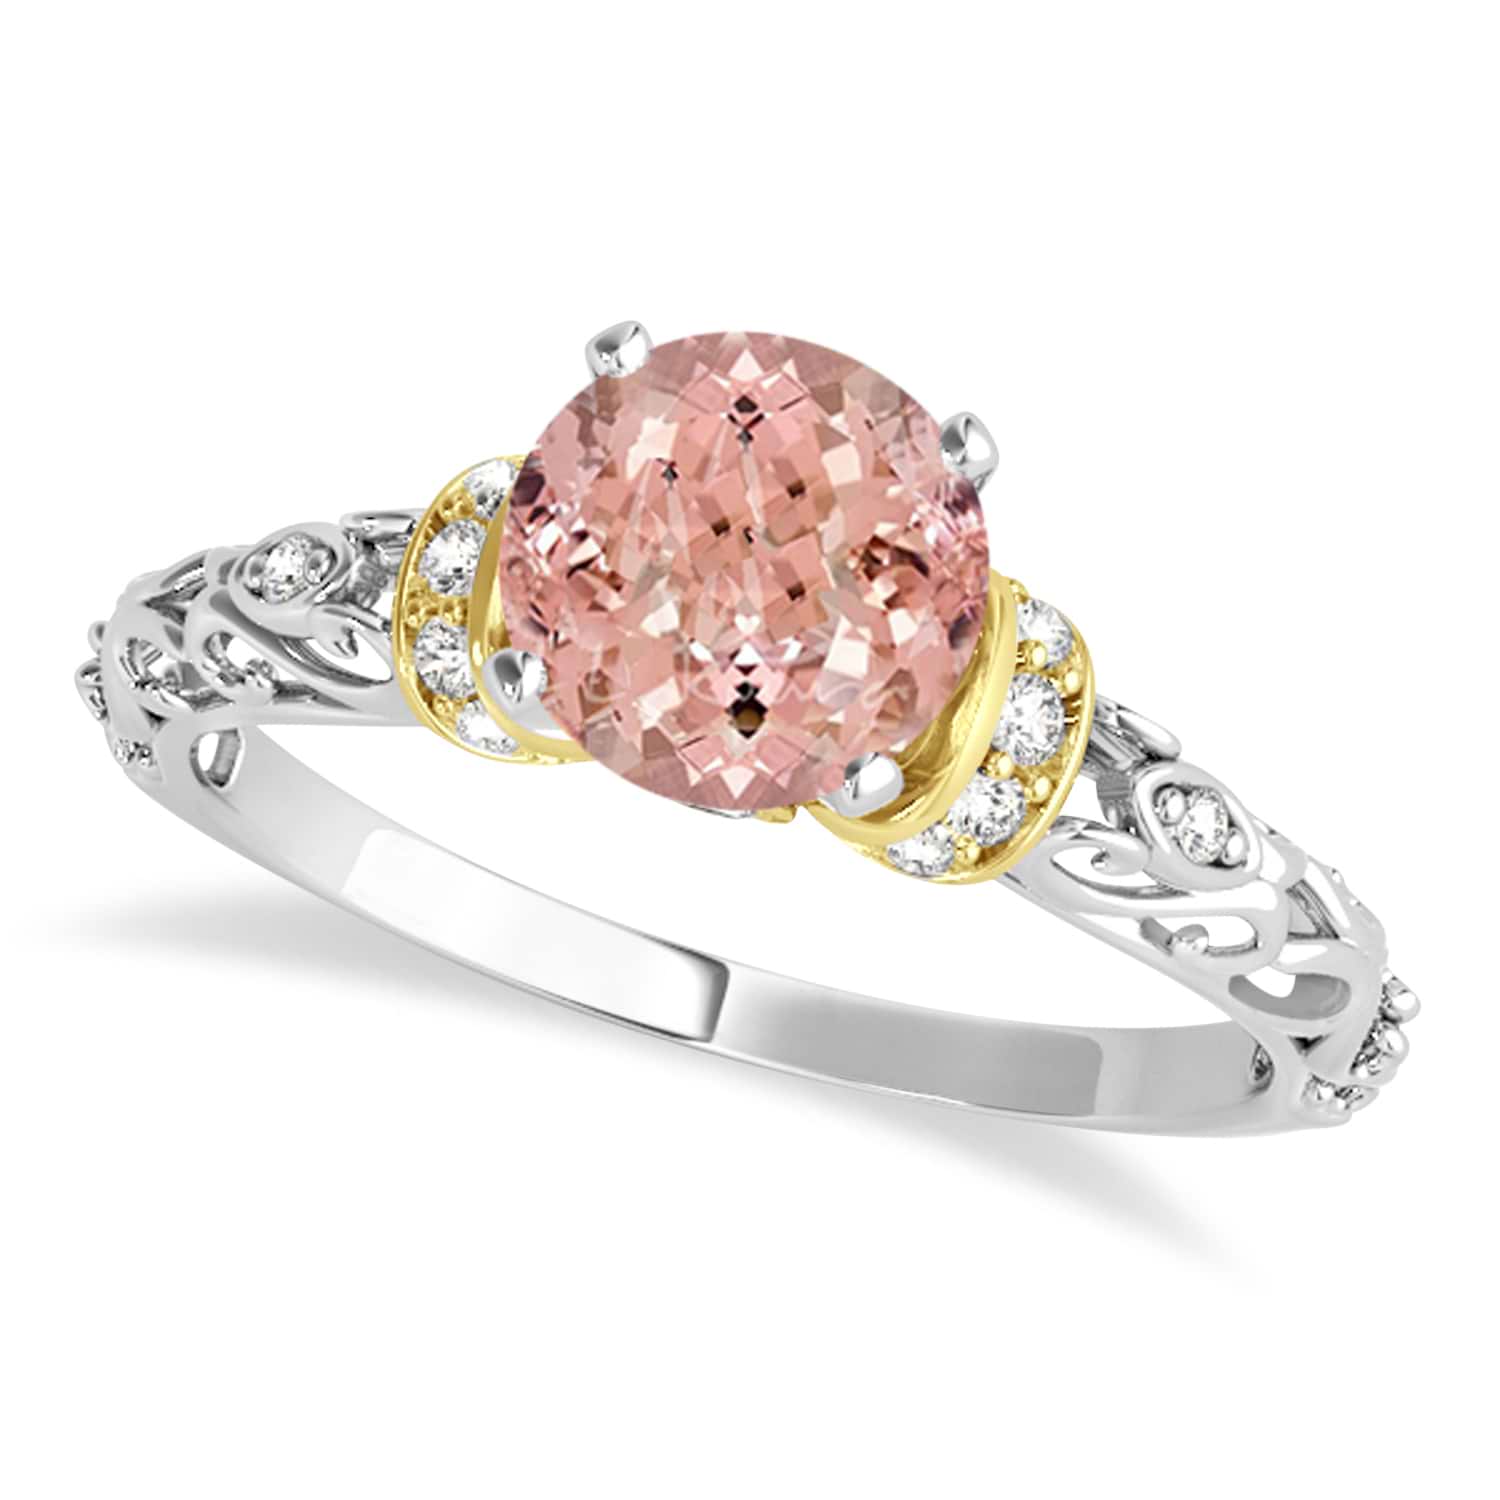 Morganite & Diamond Antique Style Engagement Ring 14k Two-Tone Gold (1.62ct)